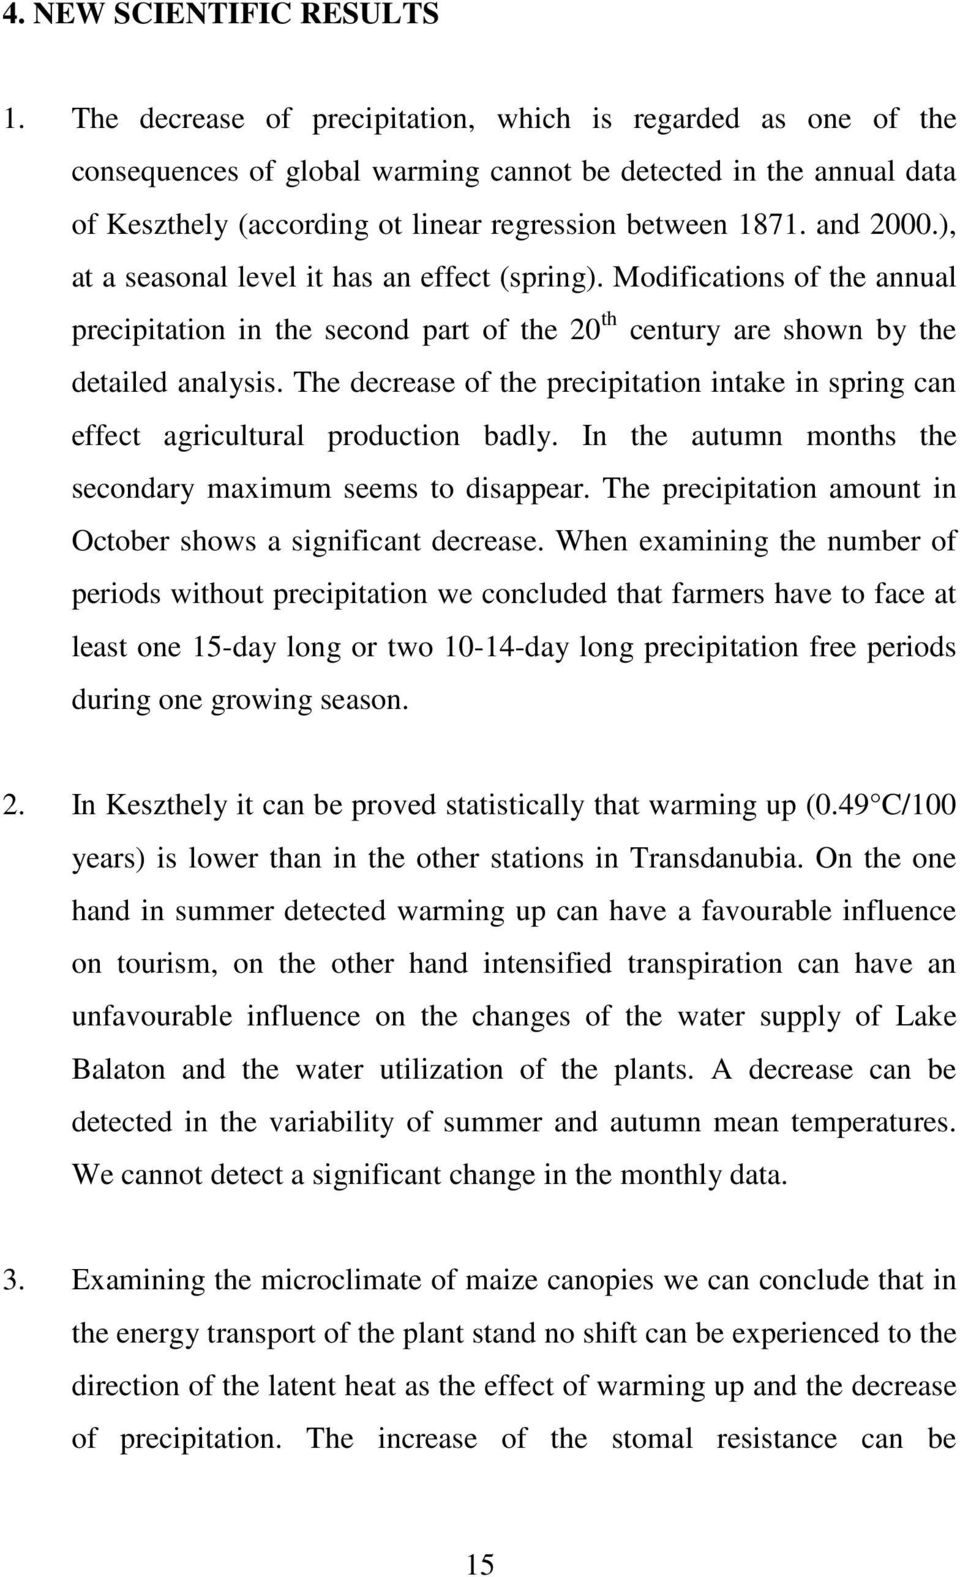 ), at a seasonal level it has an effect (spring). Modifications of the annual precipitation in the second part of the 20 th century are shown by the detailed analysis.